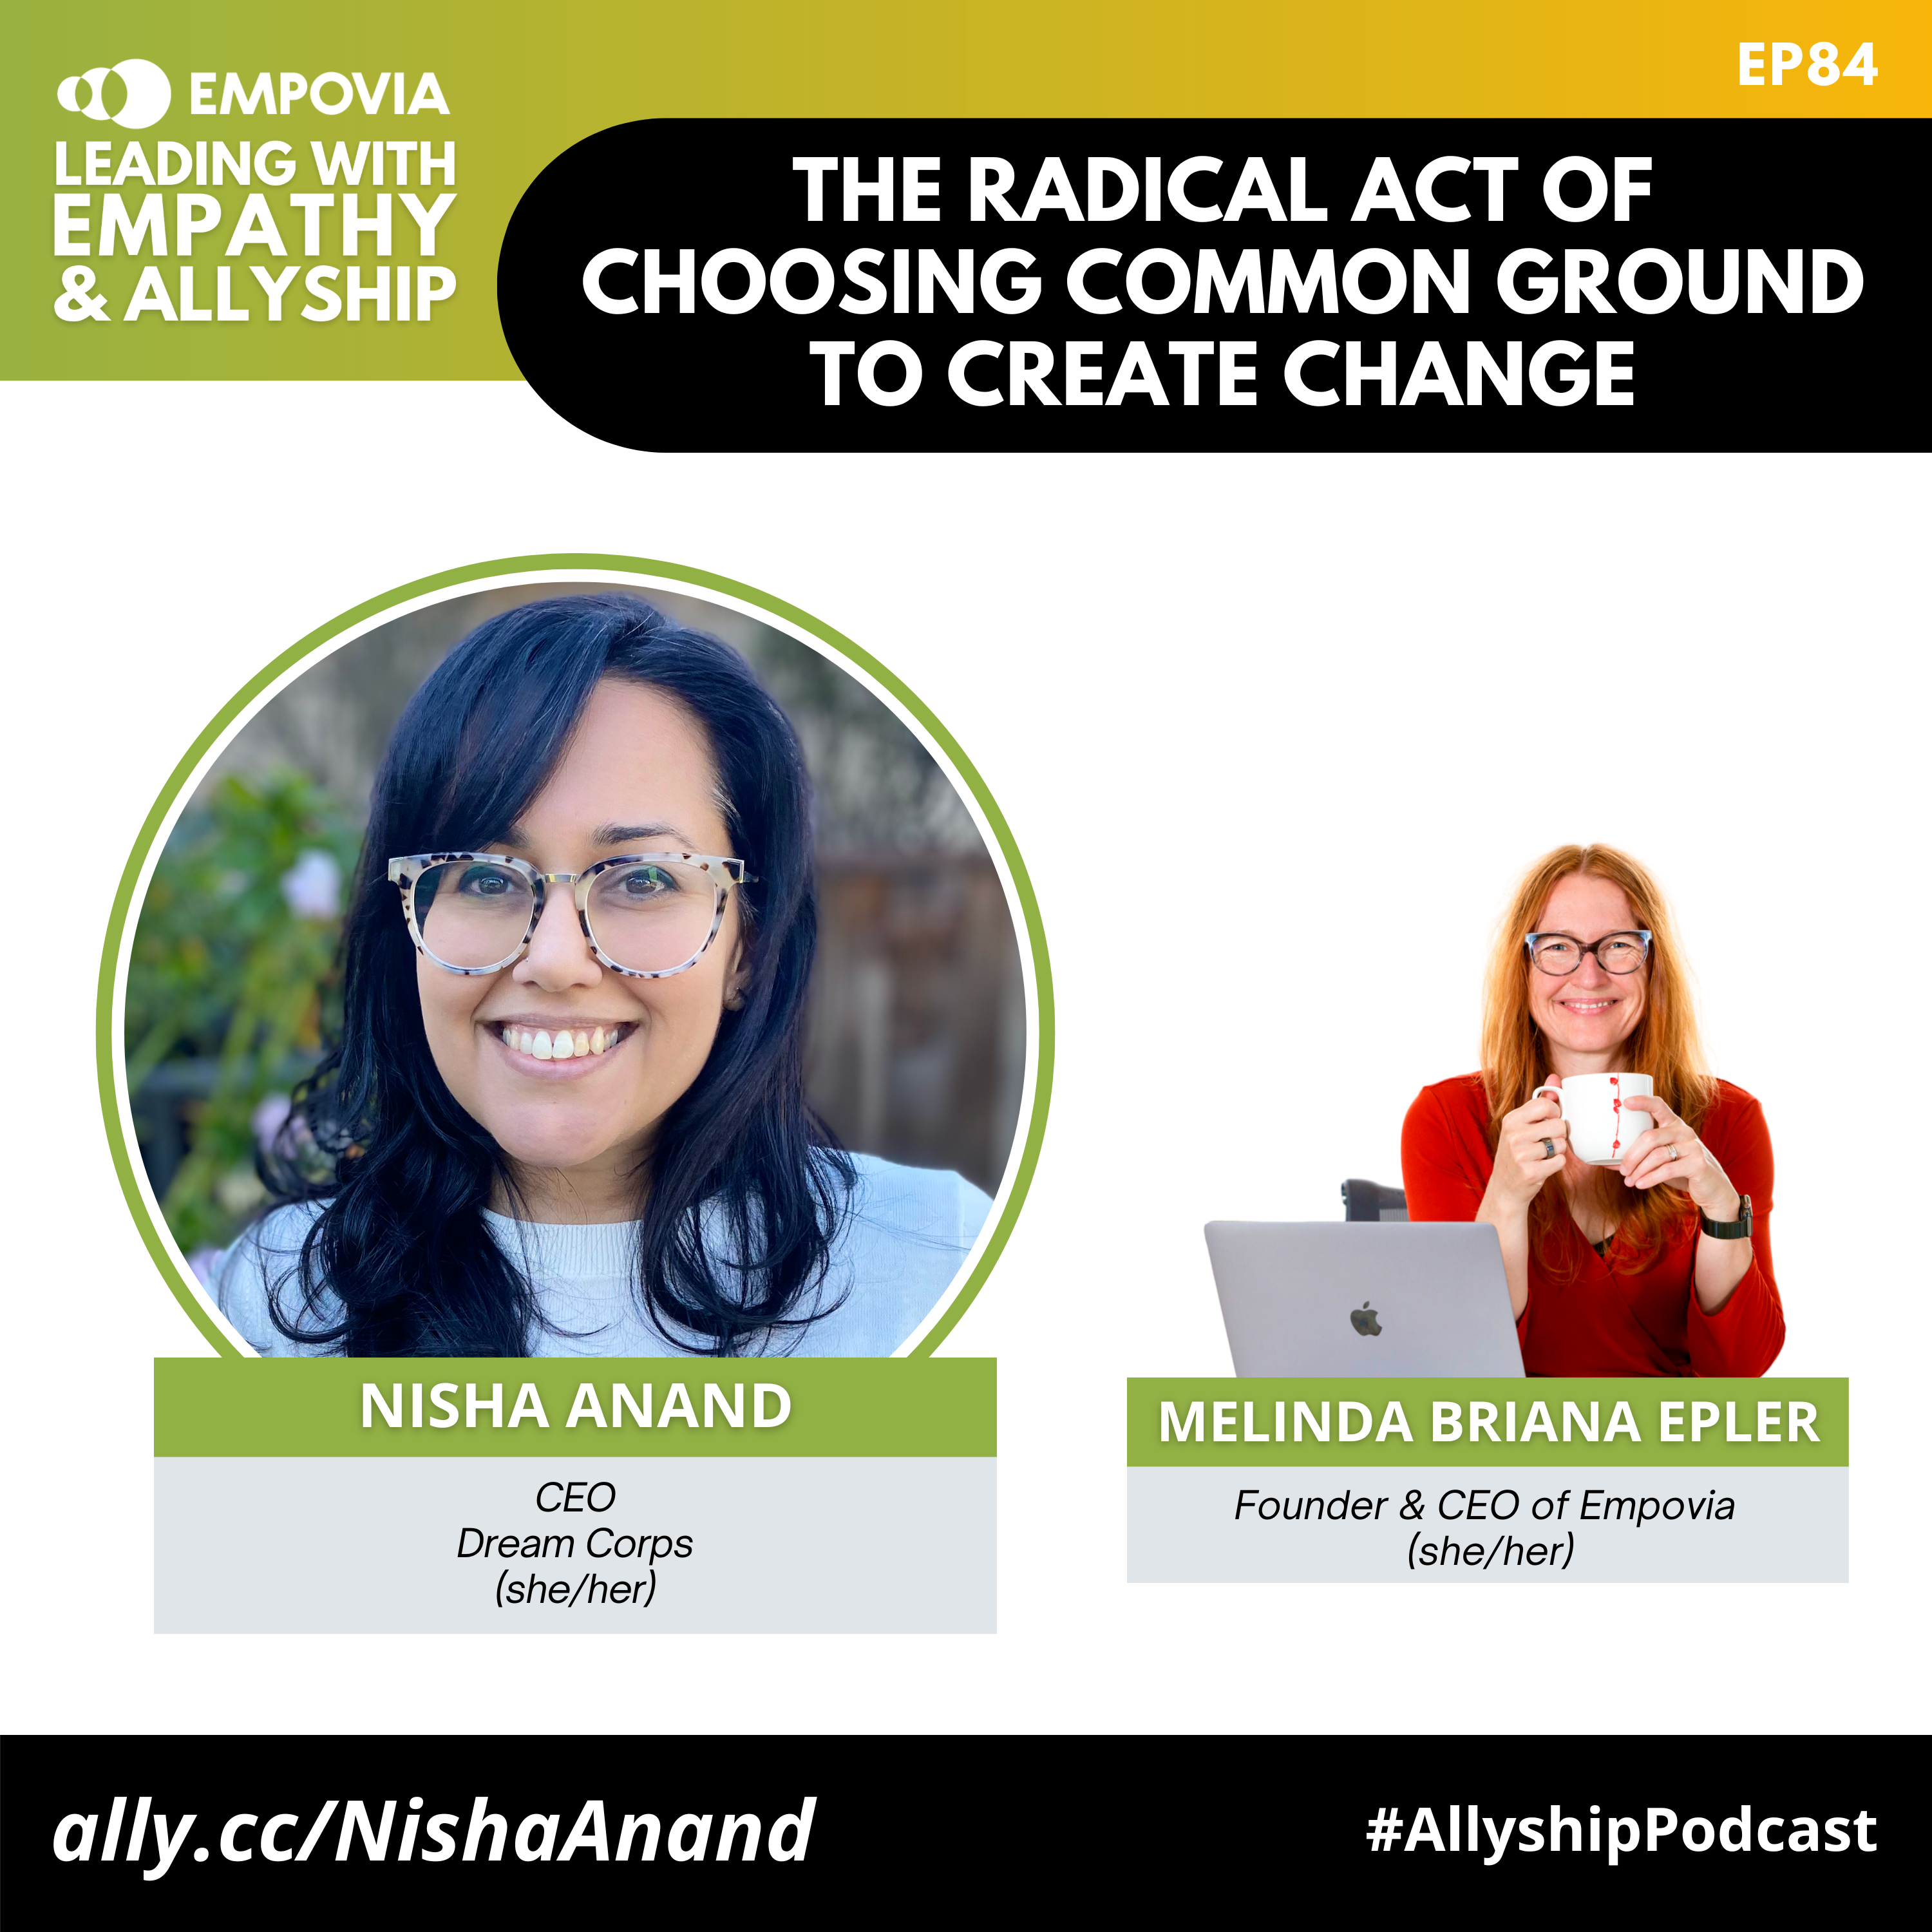 Leading With Empathy & Allyship promo and photos of Nisha Anand, a South Asian female with long wavy black hair, brown eyes, glasses, and a striped black and white long sleeve; and host Melinda Briana Epler, a White woman with red hair, glasses, and orange shirt holding a white mug behind a laptop.